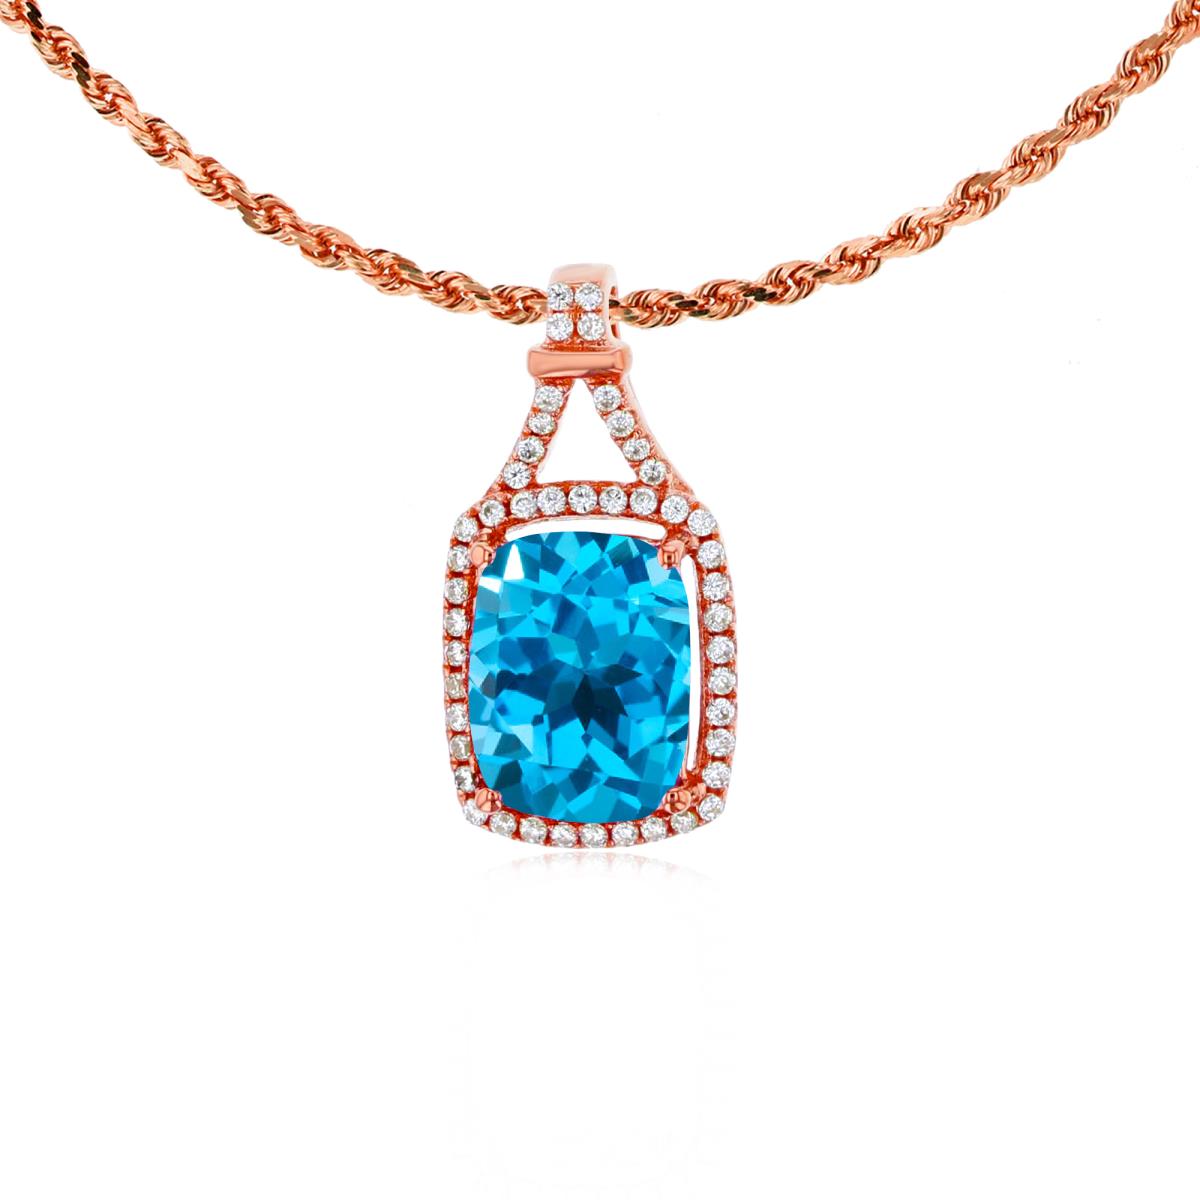 10K Rose Gold 8x6mm Cushion Swiss Blue Topaz & 0.13 CTTW Rd Diamonds Halo 18" Rope Chain Necklace